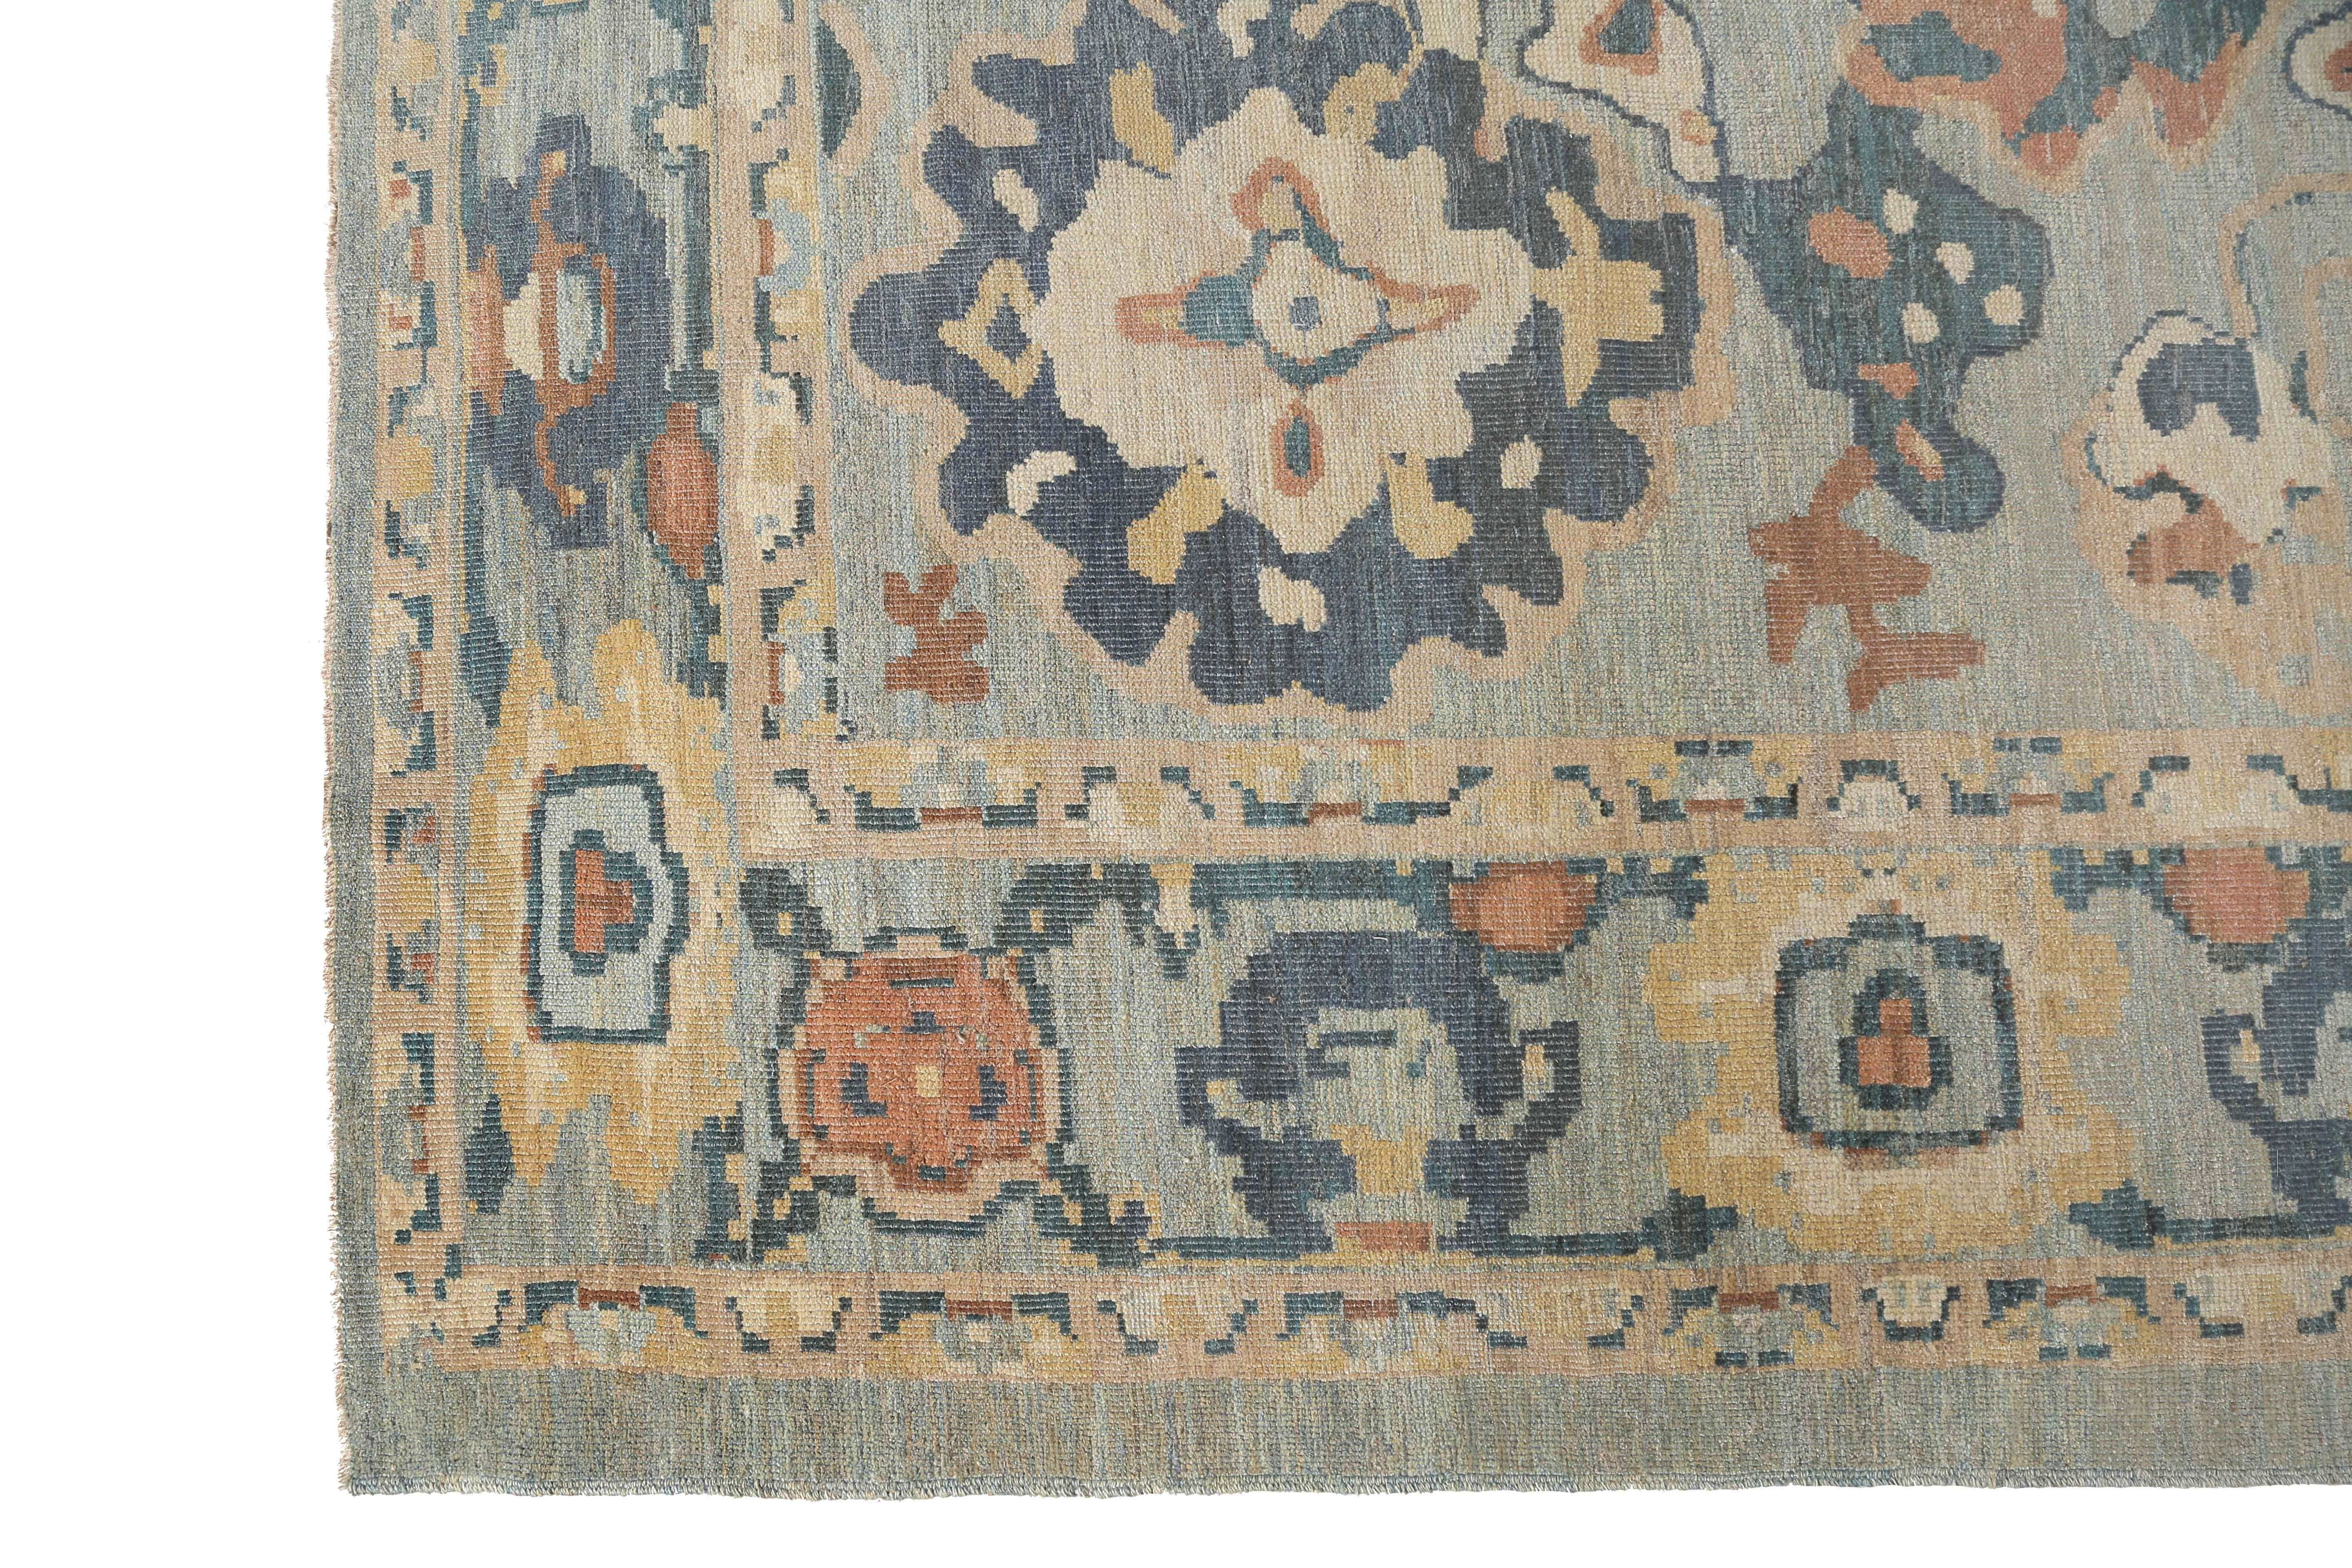 Introducing our handmade Sultanabad rug, measuring 13'4